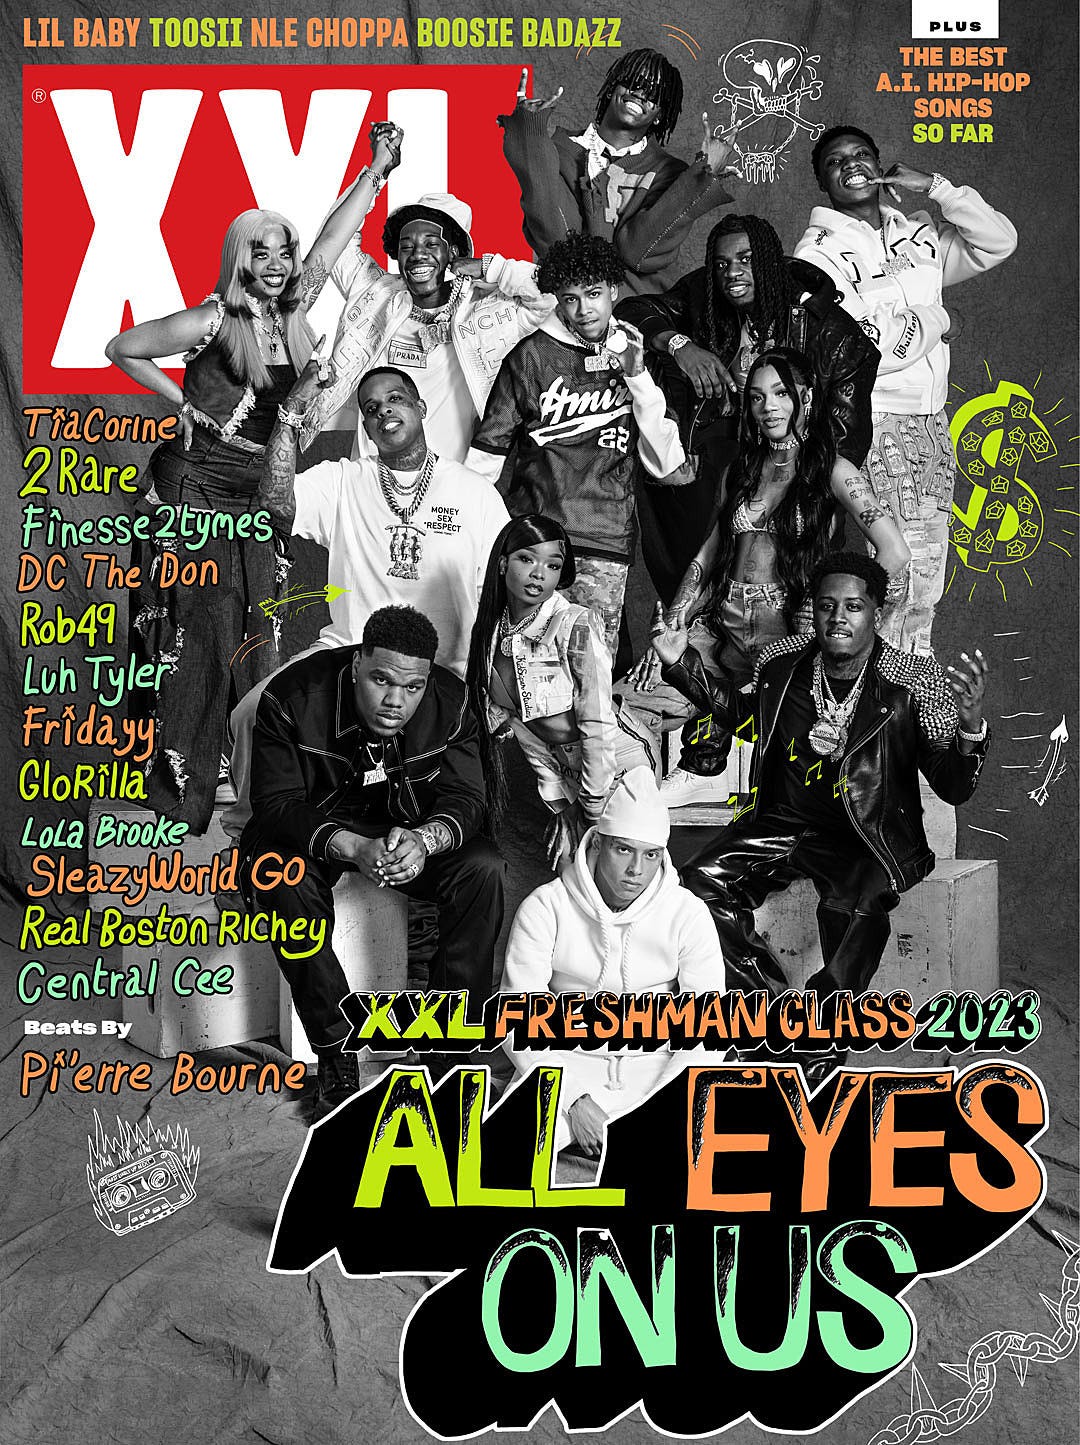 Ranking The 2023 XXL Freshman. It is now July which means all the… by